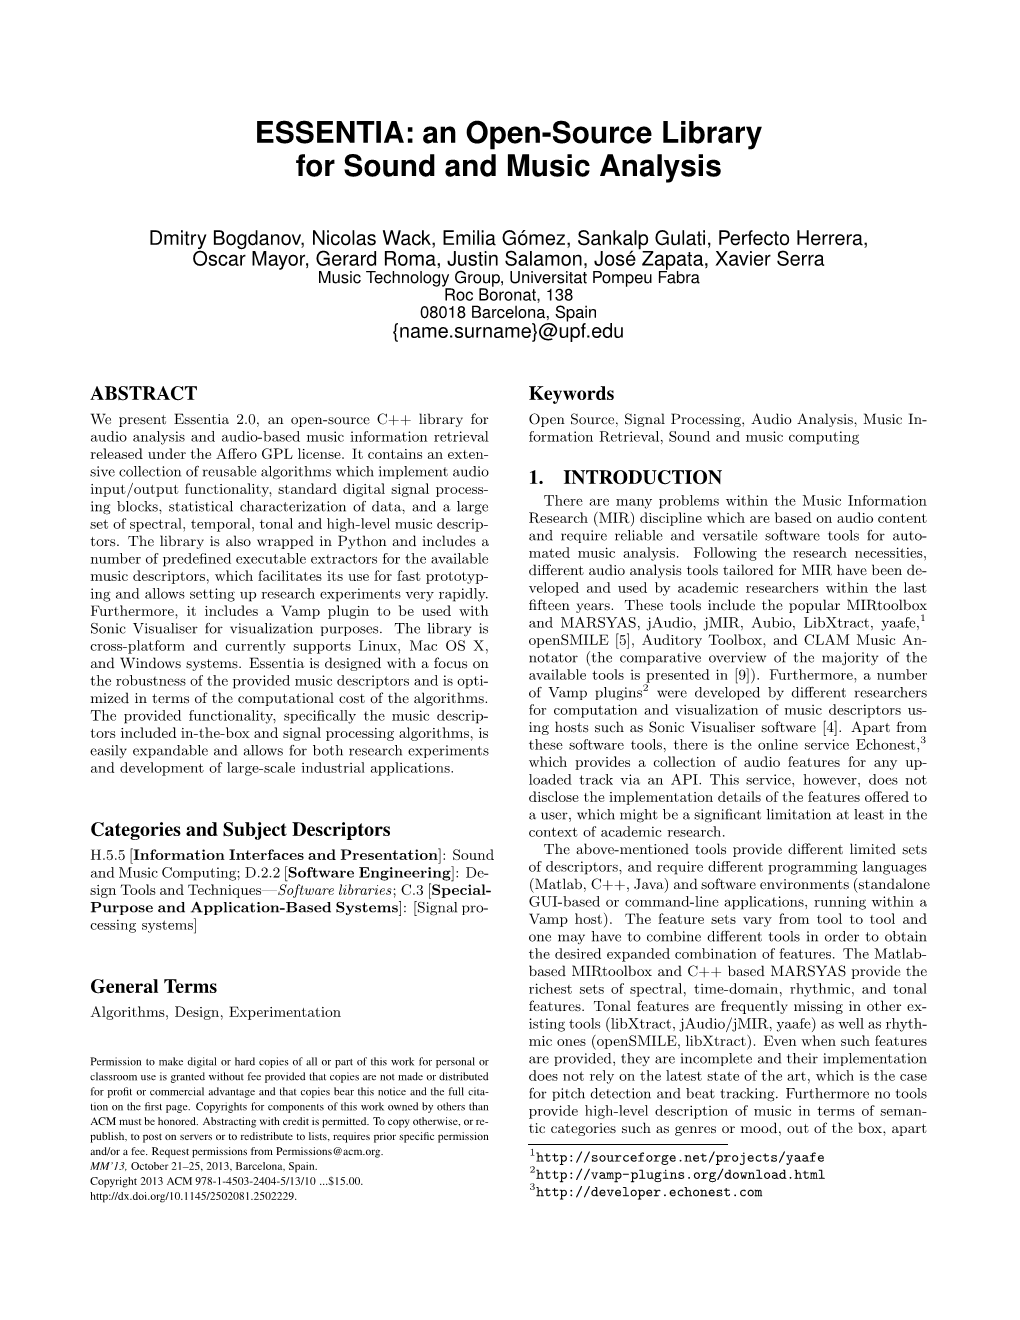 ESSENTIA: an Open-Source Library for Sound and Music Analysis